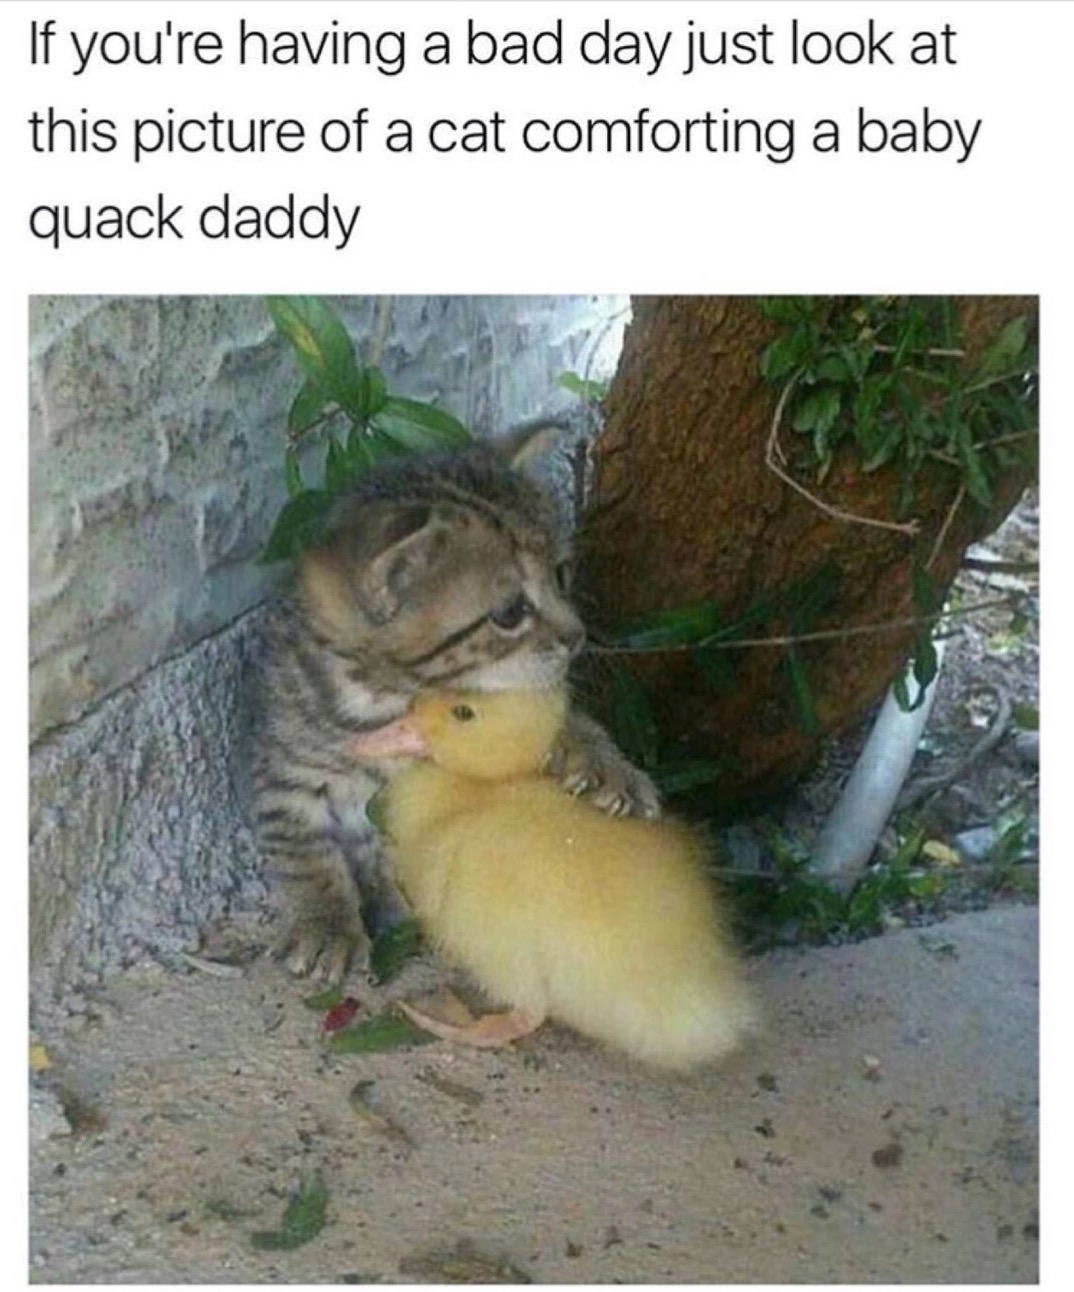 meme stream - if you re having a bad day meme - If you're having a bad day just look at this picture of a cat comforting a baby quack daddy